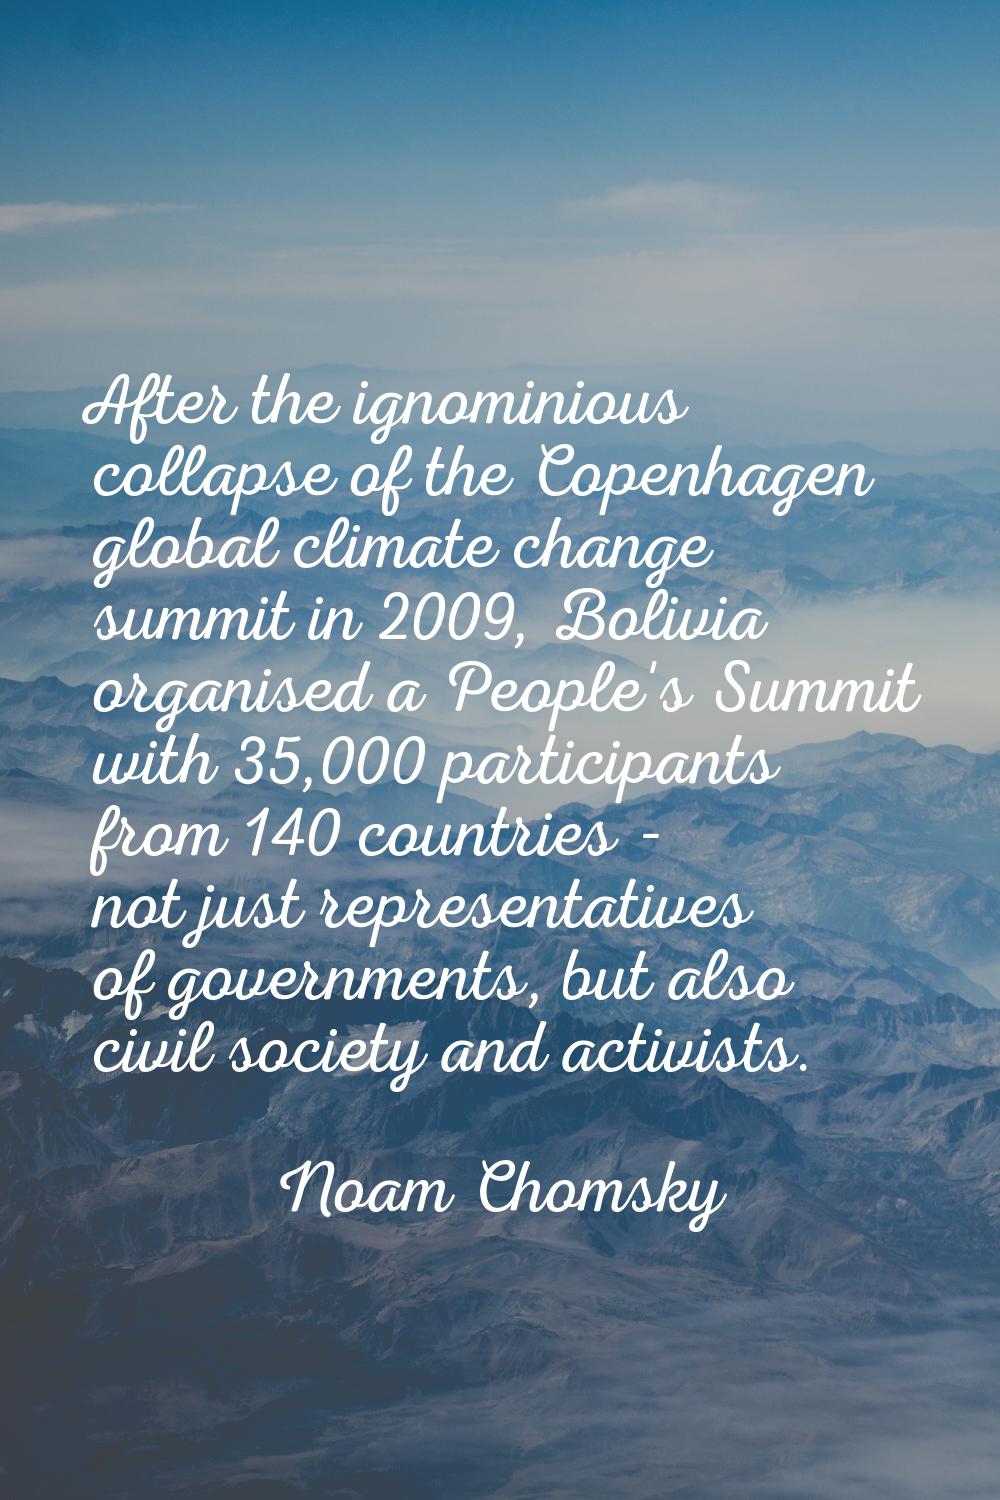 After the ignominious collapse of the Copenhagen global climate change summit in 2009, Bolivia orga